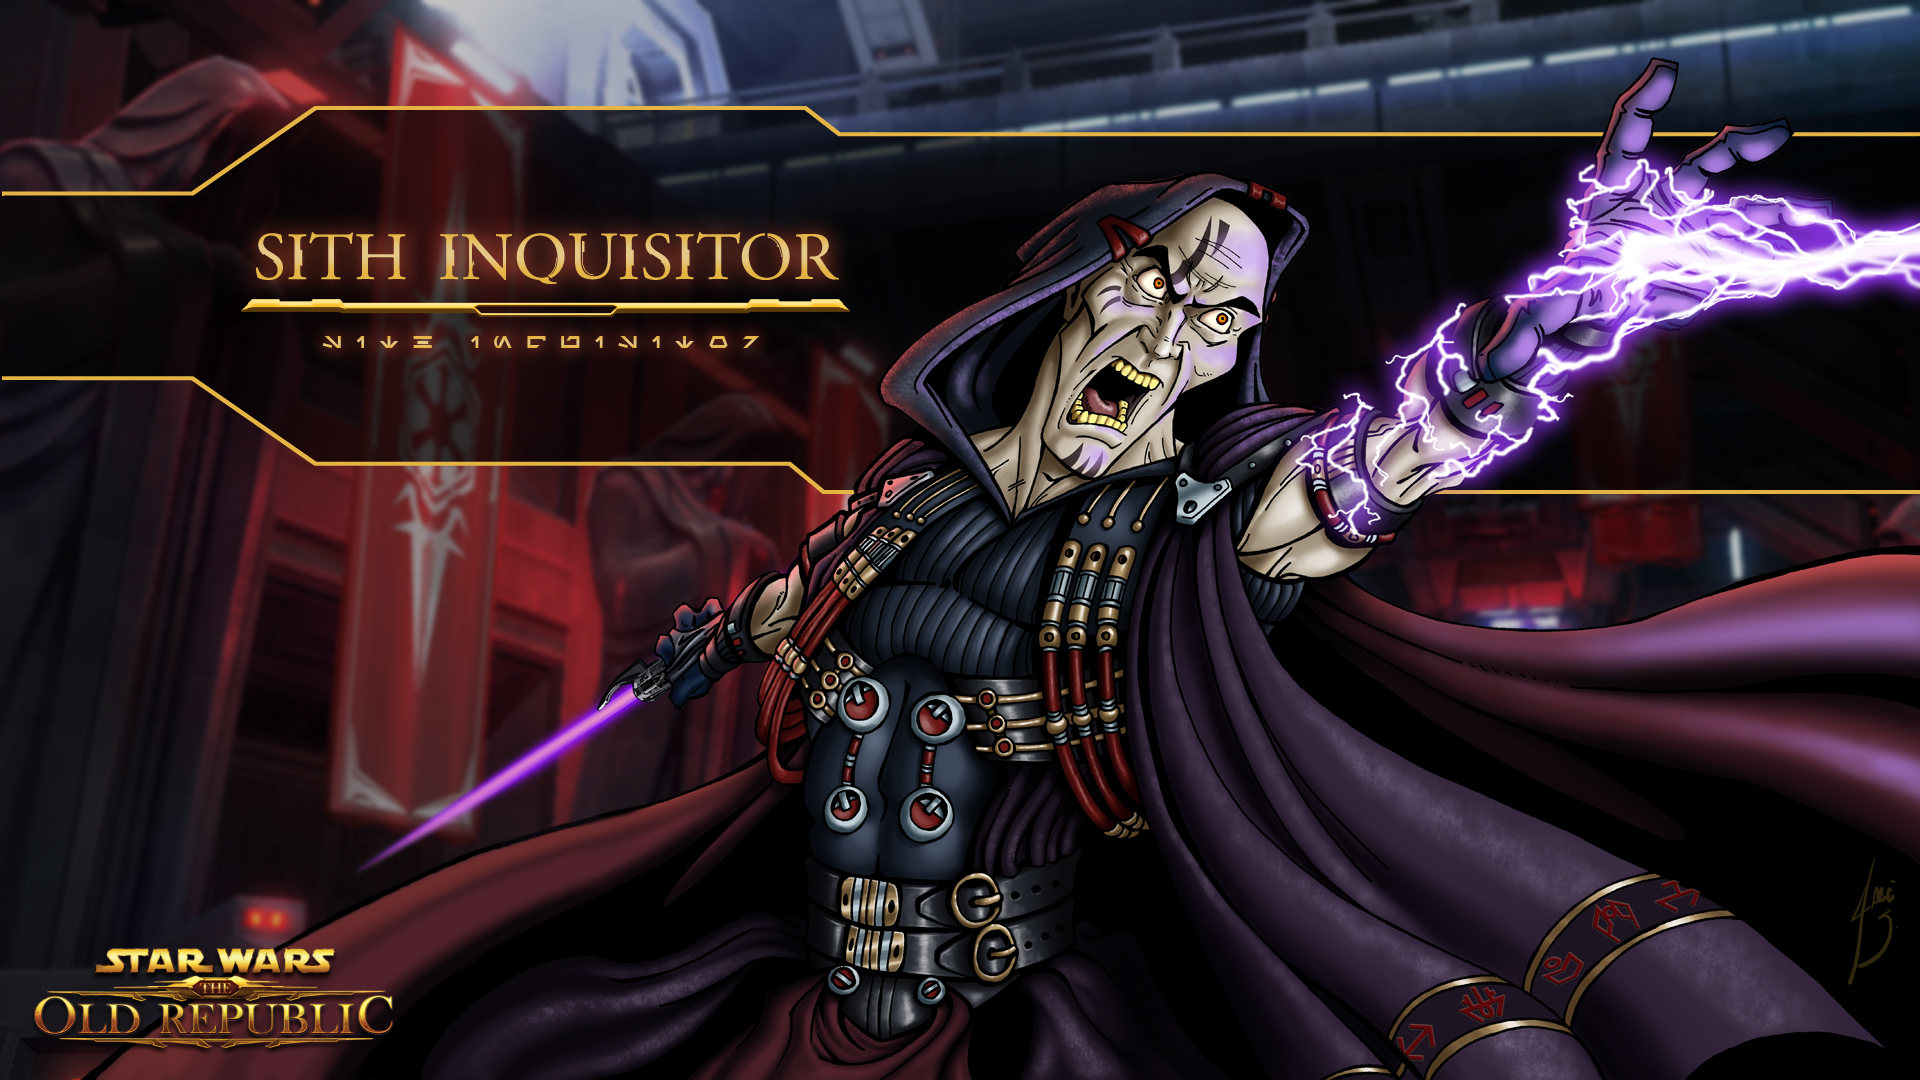 Sith Inquisitor Wallpaper by JaceSteenbarger on